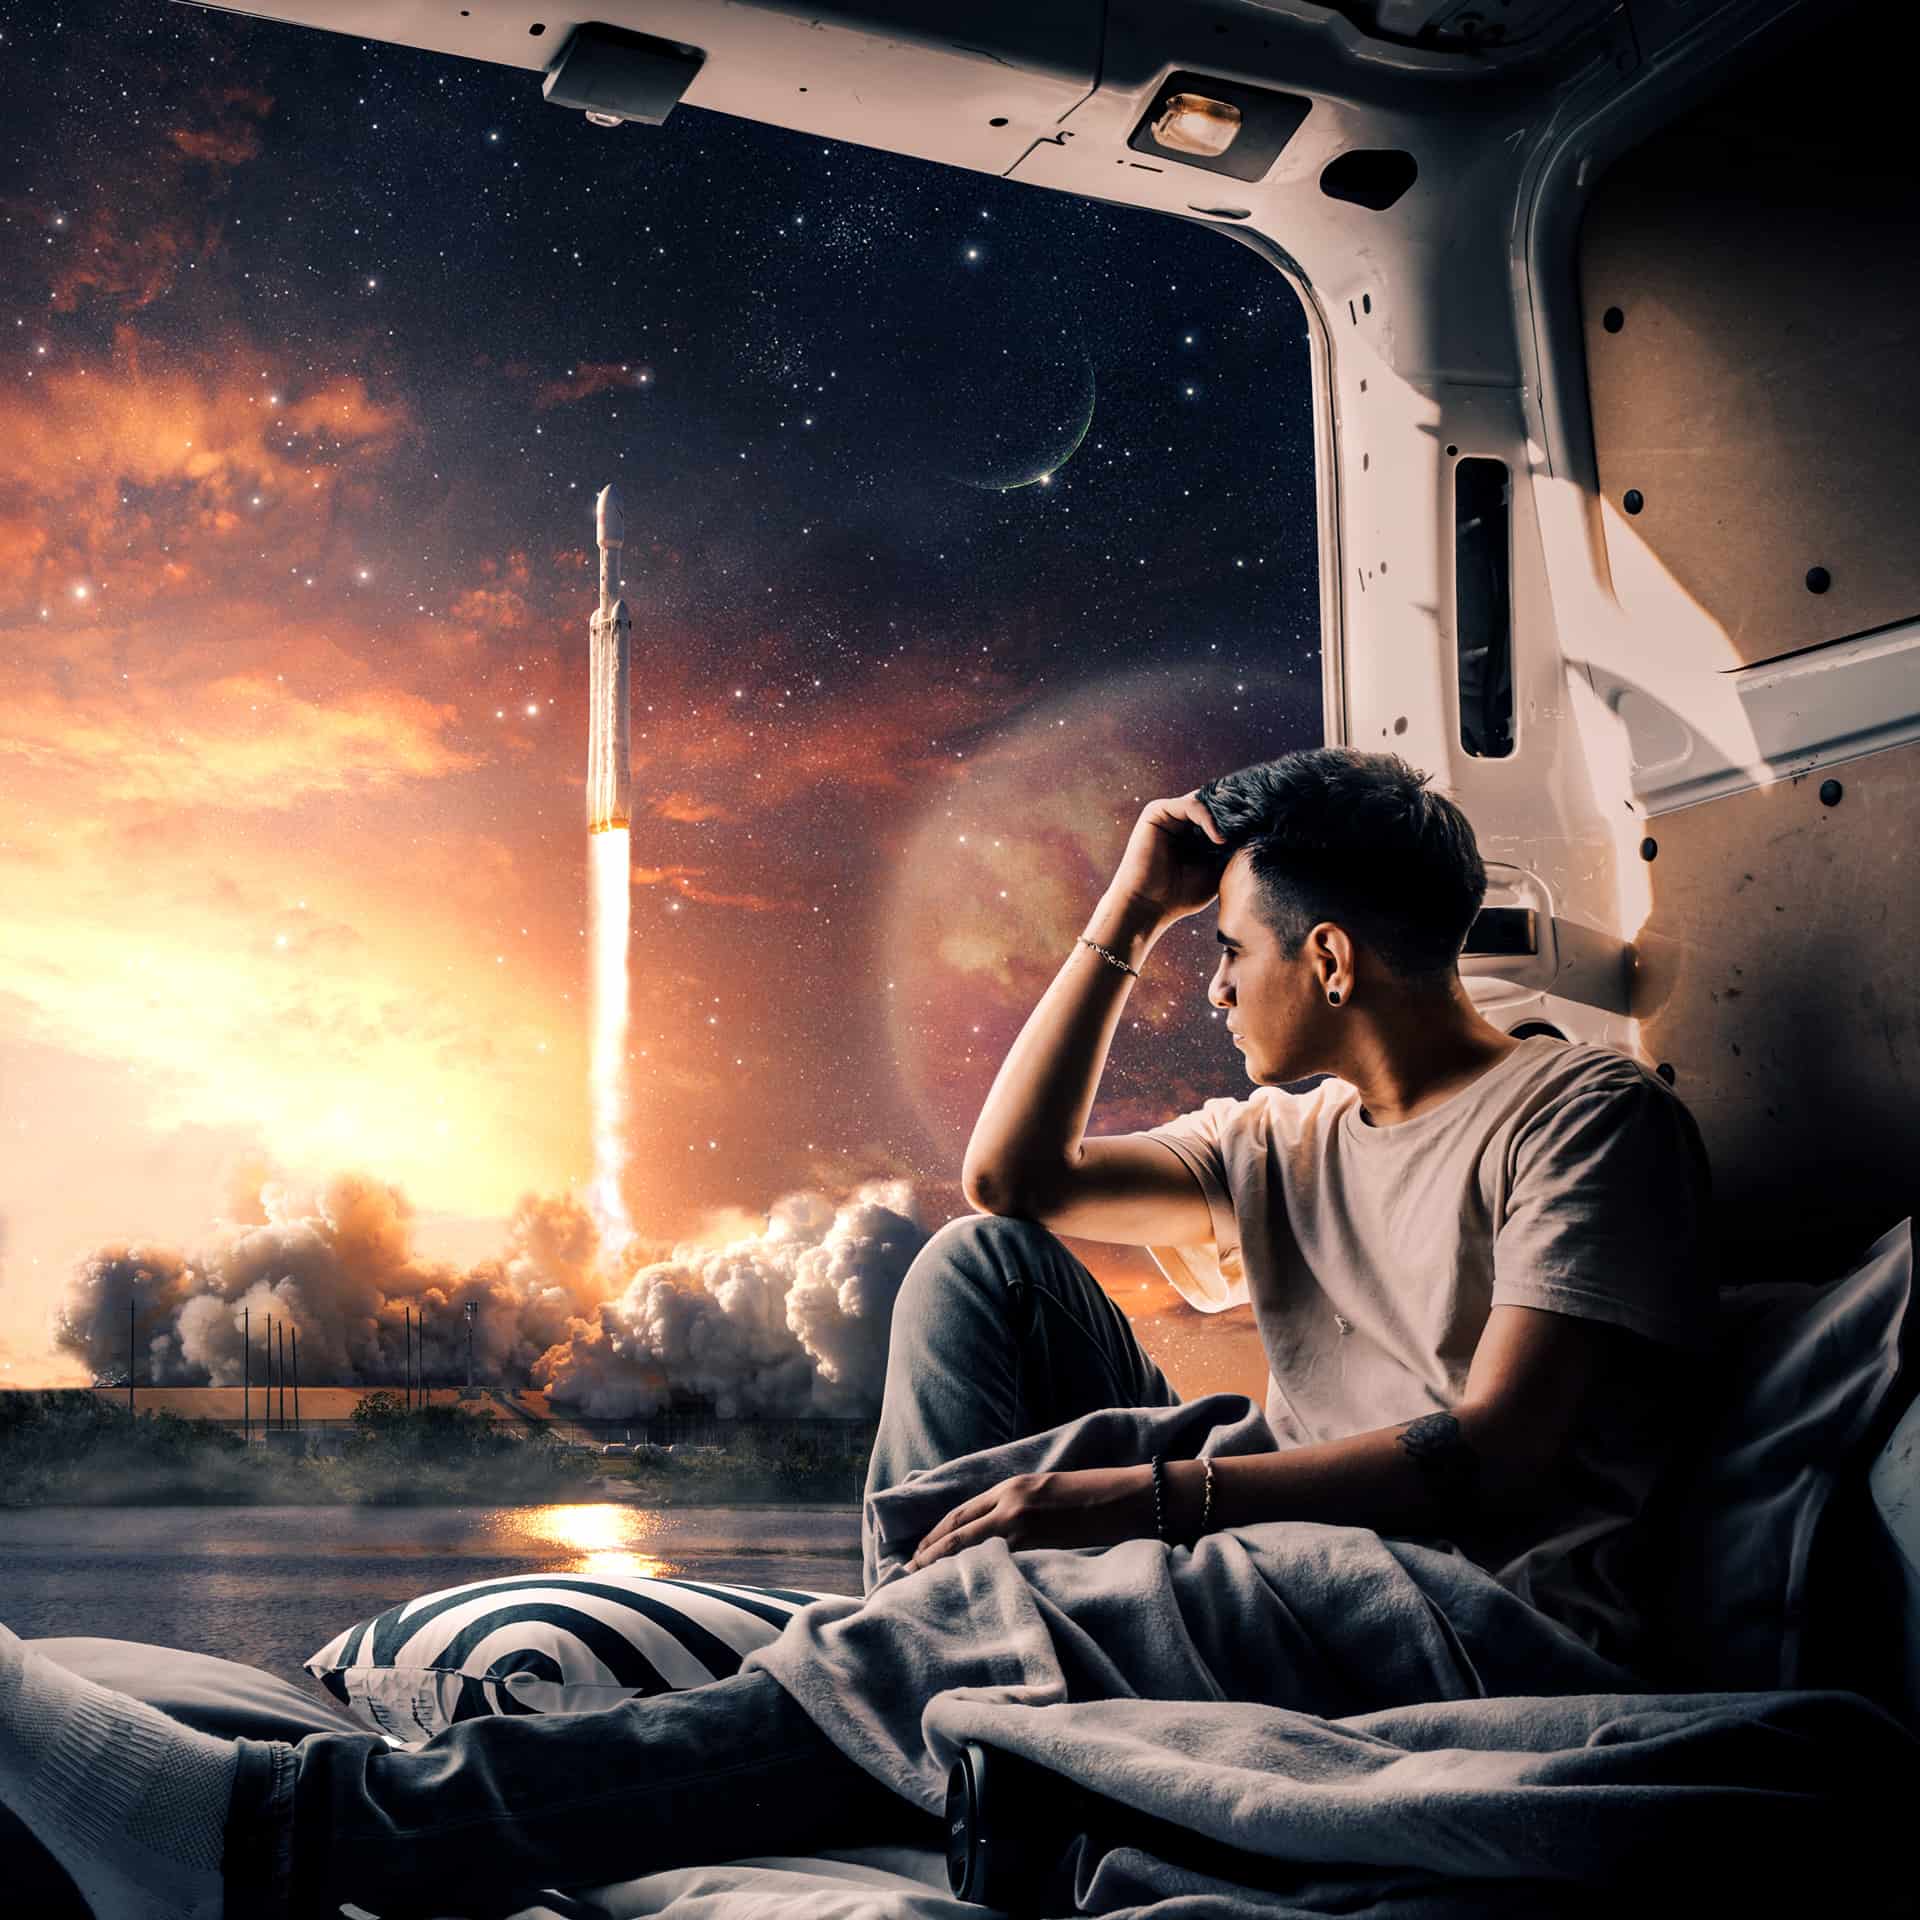 How to Create a Realistic scene of Rocket Launch in Photoshop